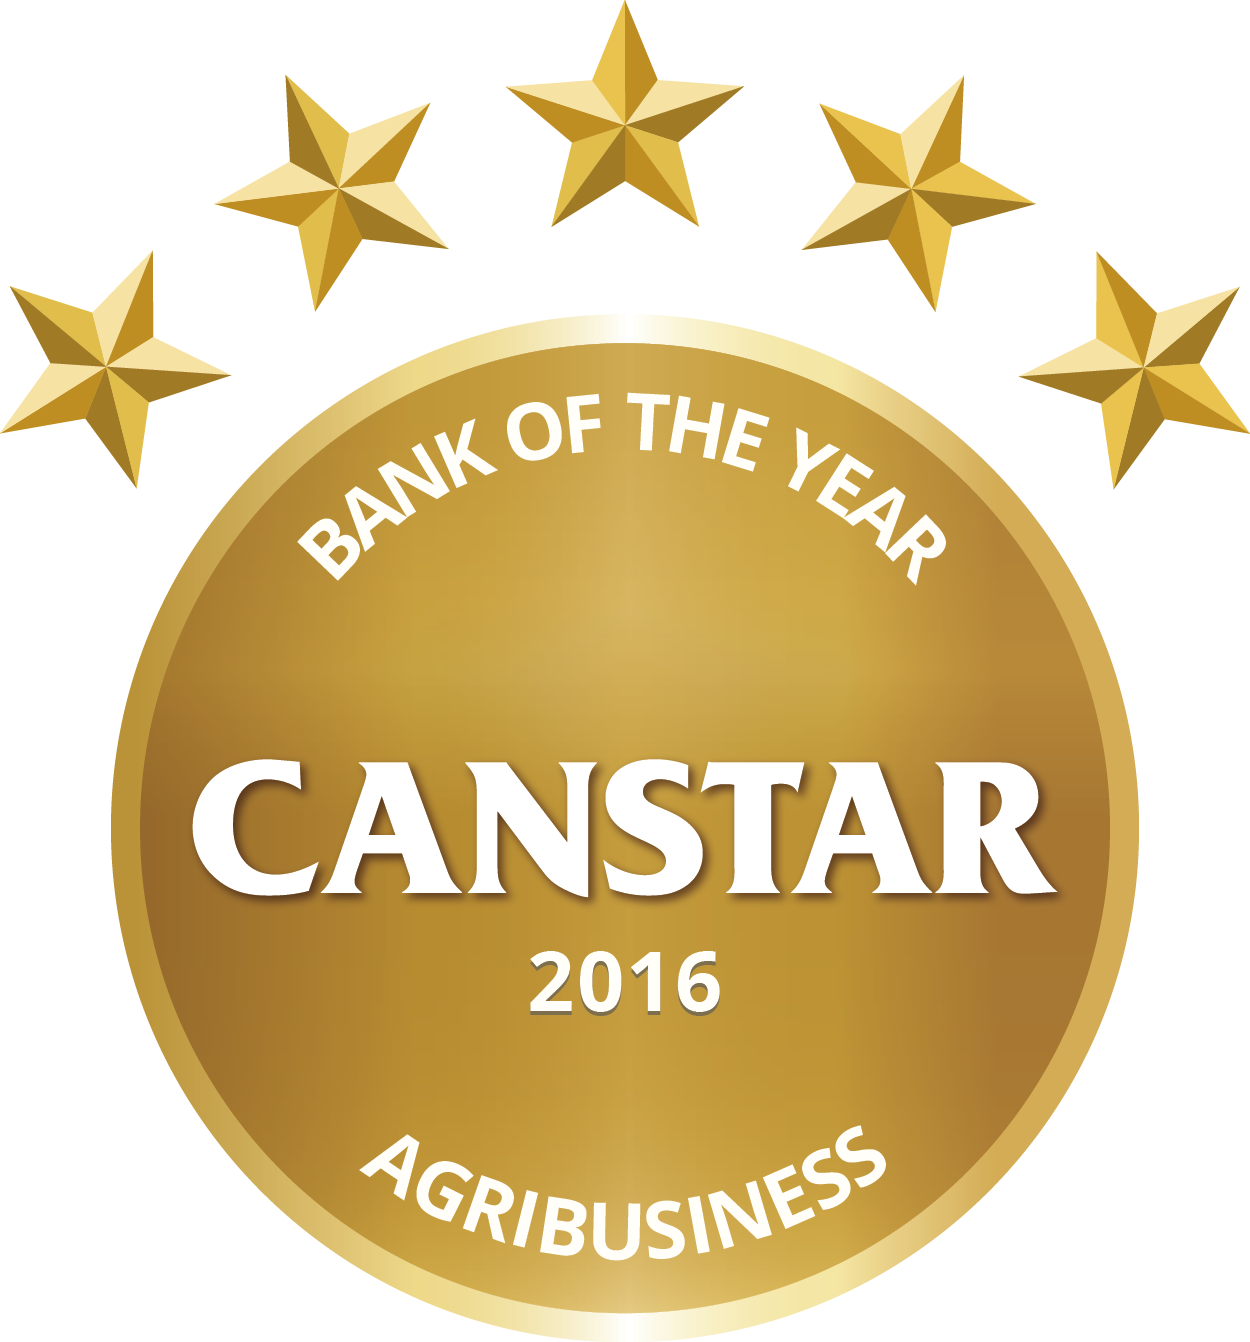 CANSTAR 2016 &#8211; Bank of the Year &#8211; Agribusiness